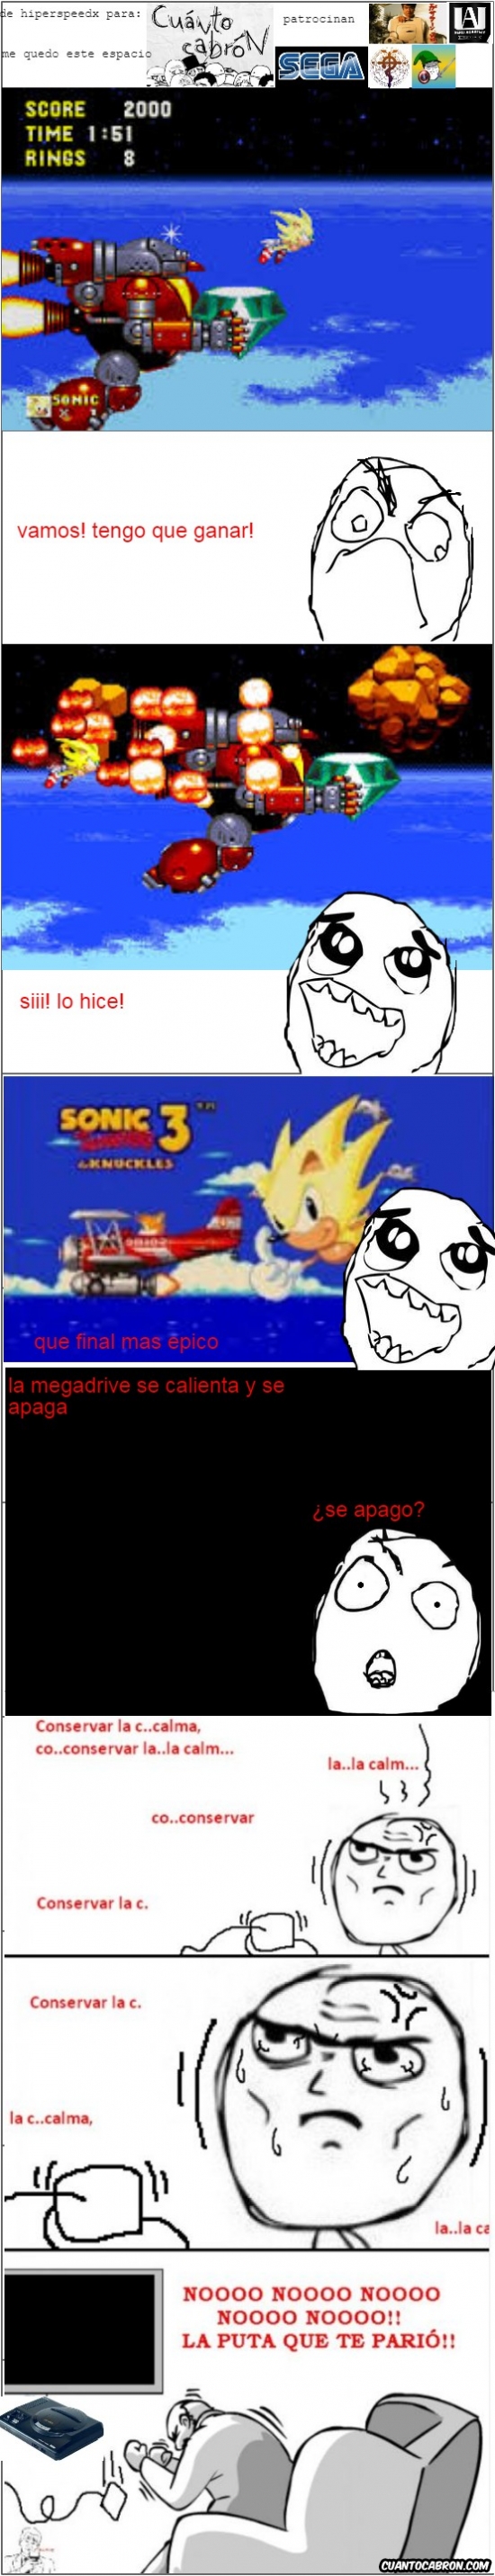 megadrive,sonic 3 &knucklesPD:soy argentino,tano pasman